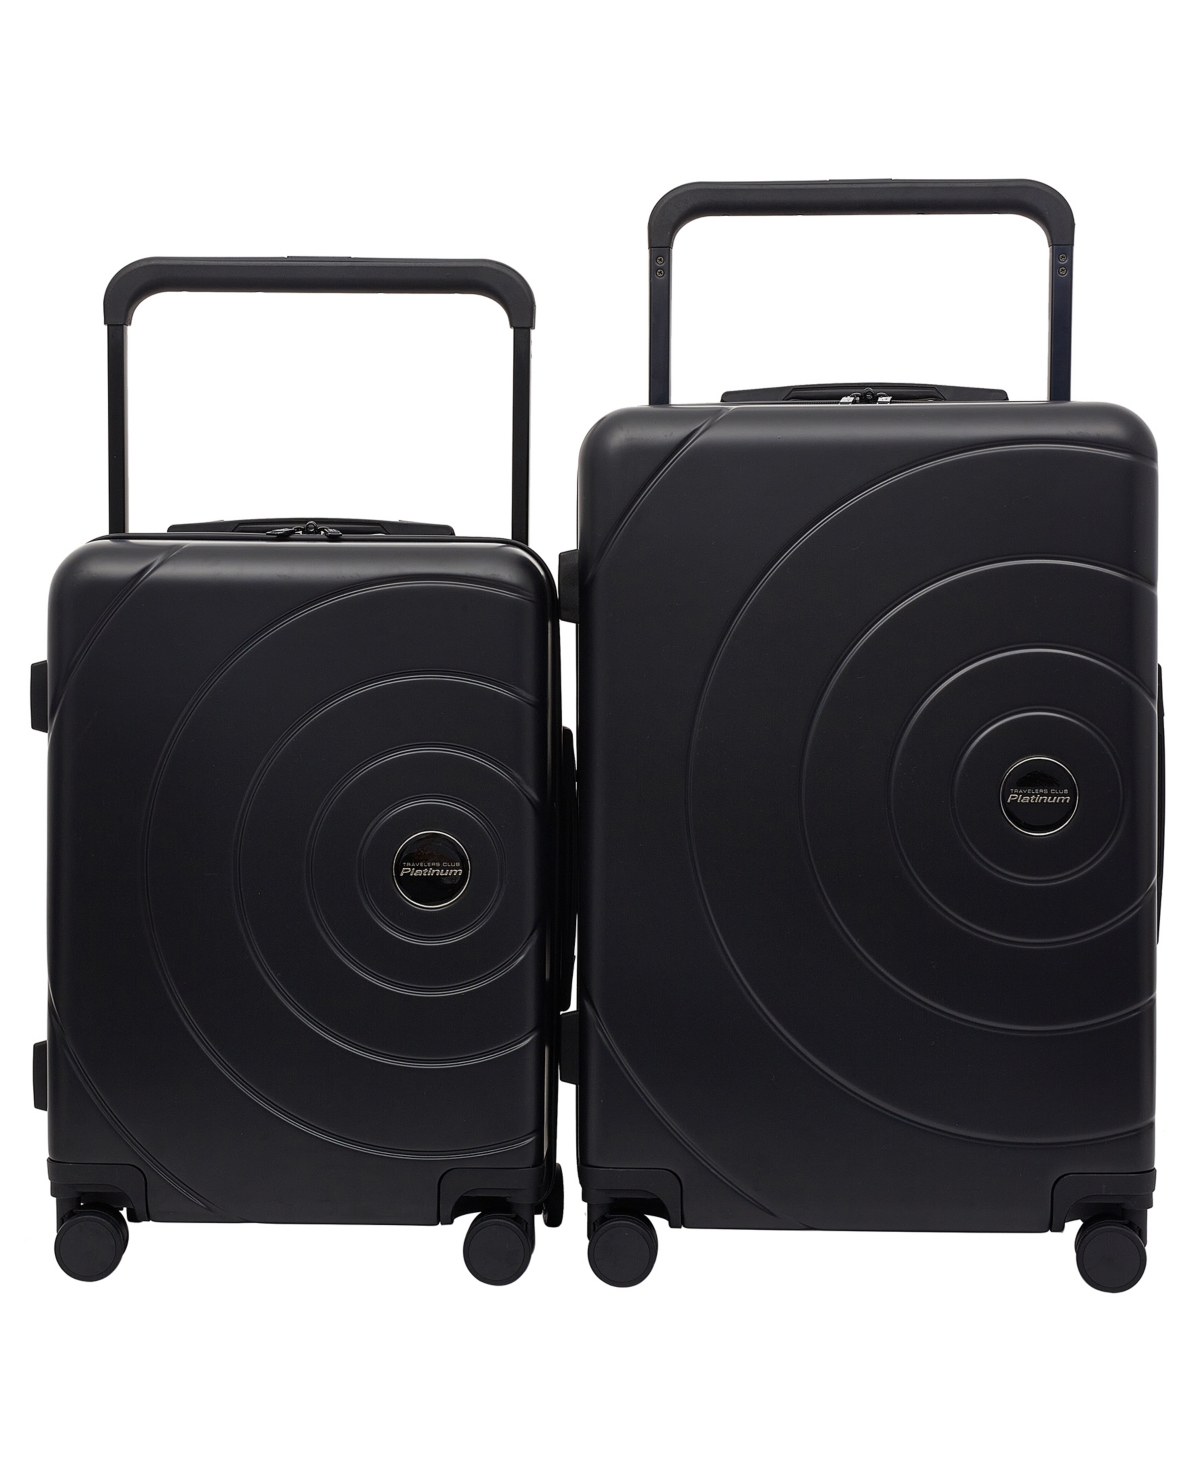 Travelers Club Odyssey Collection 2 Piece Rolling Hard Case Collection With X-tra Wide Telescopic Handle Set In Black